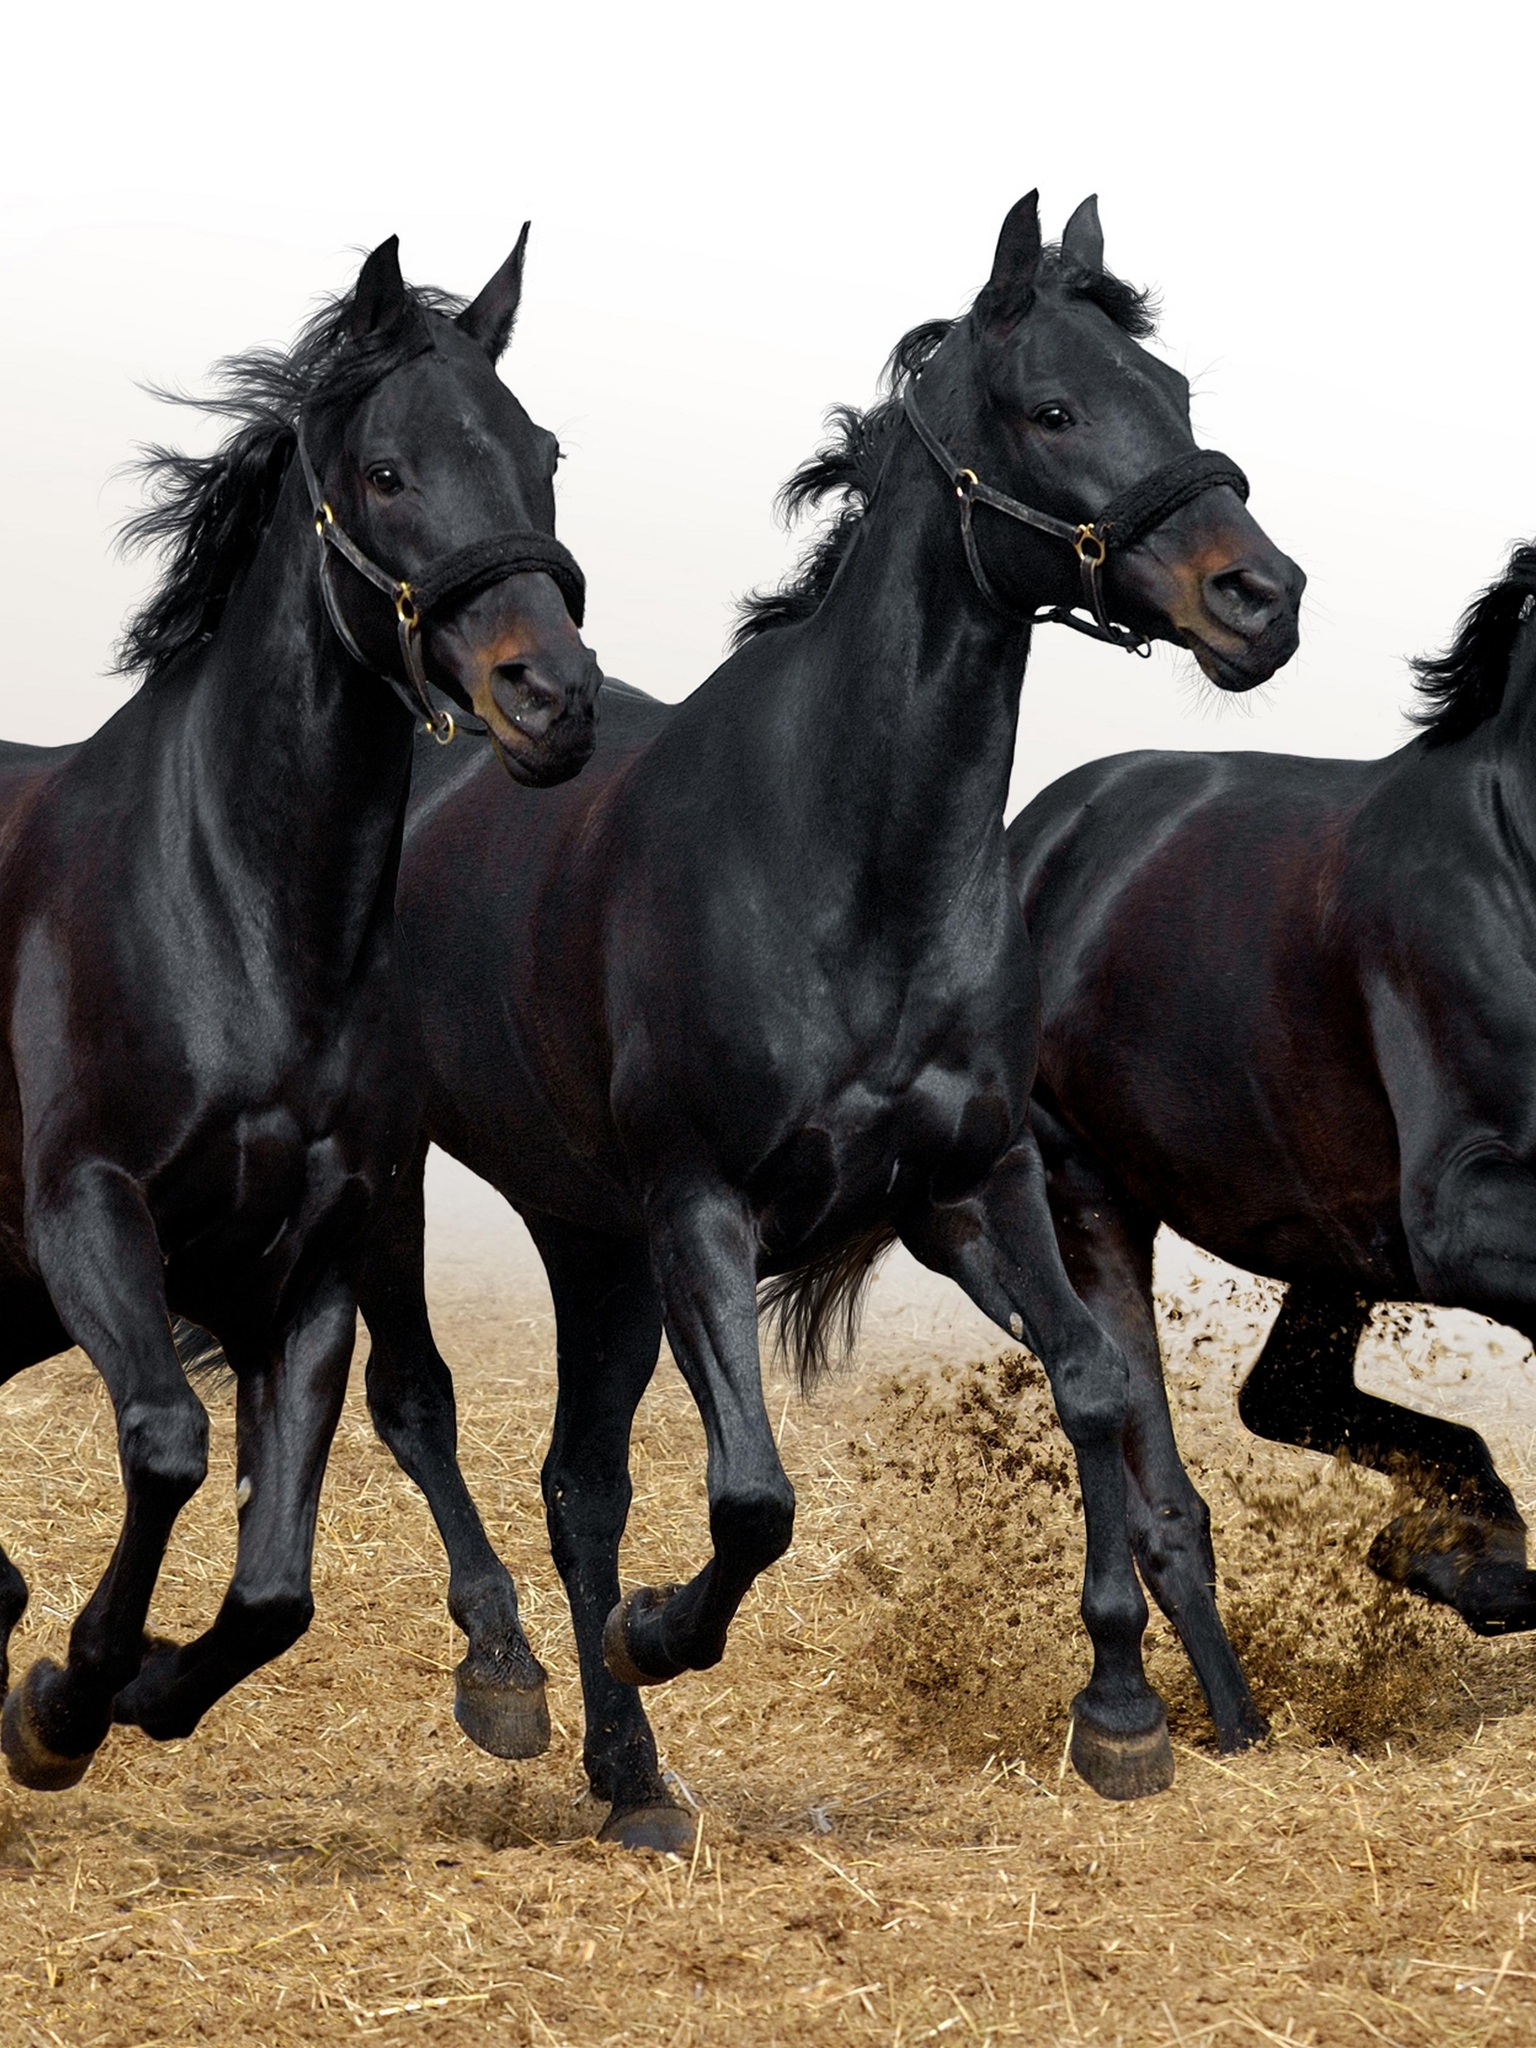 Image: Three, horse, horses, running, gallop, mane, black tail, hooves